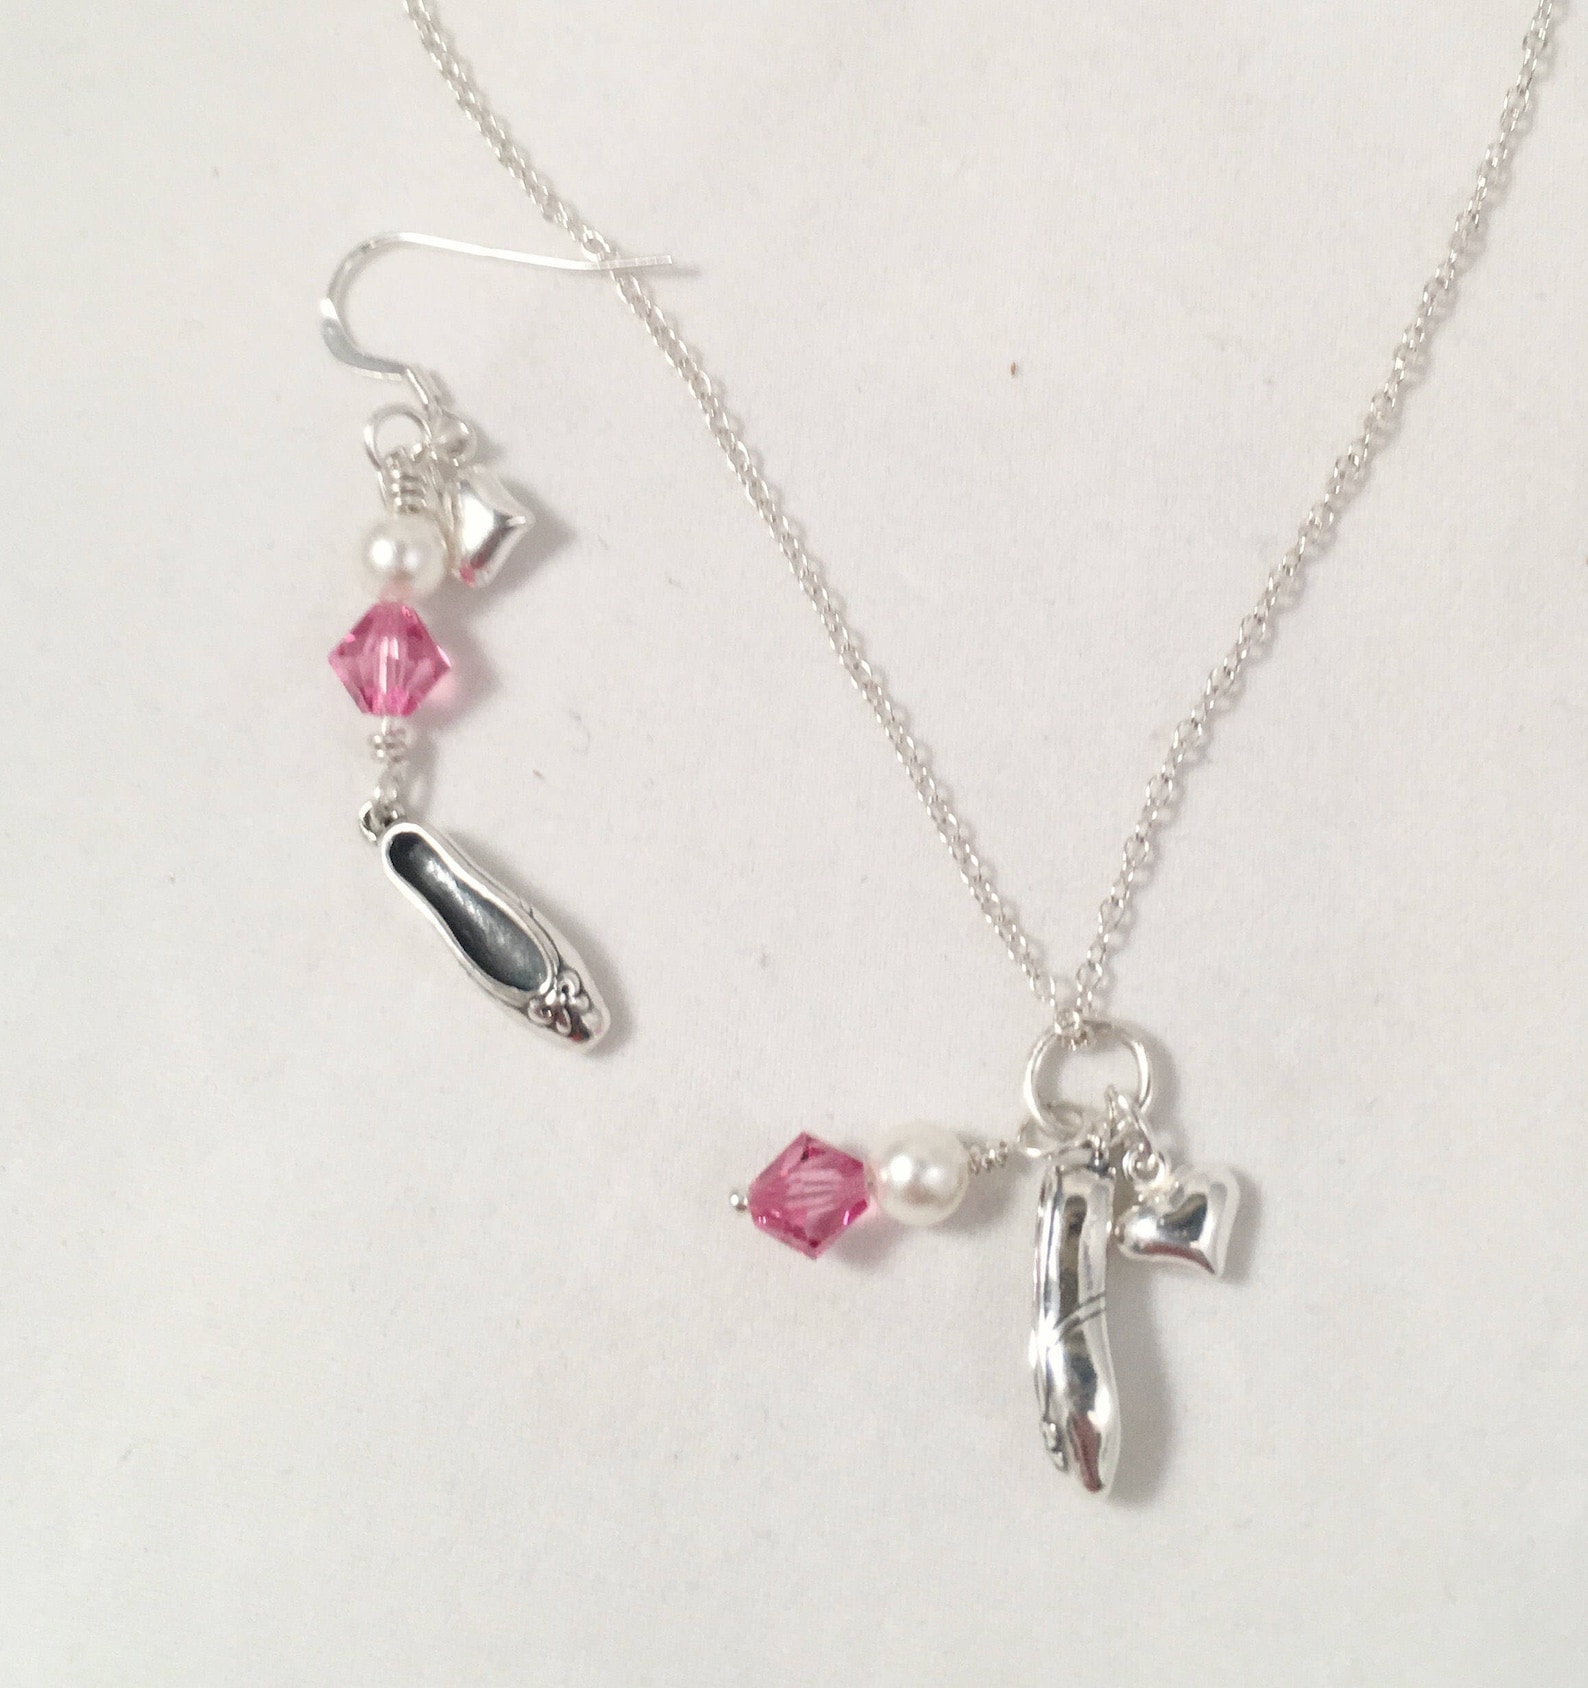 sterling ballet slipper + charms necklace, ballet slipper recital necklace, ballerina jewelry, ballet point shoes necklace, girl